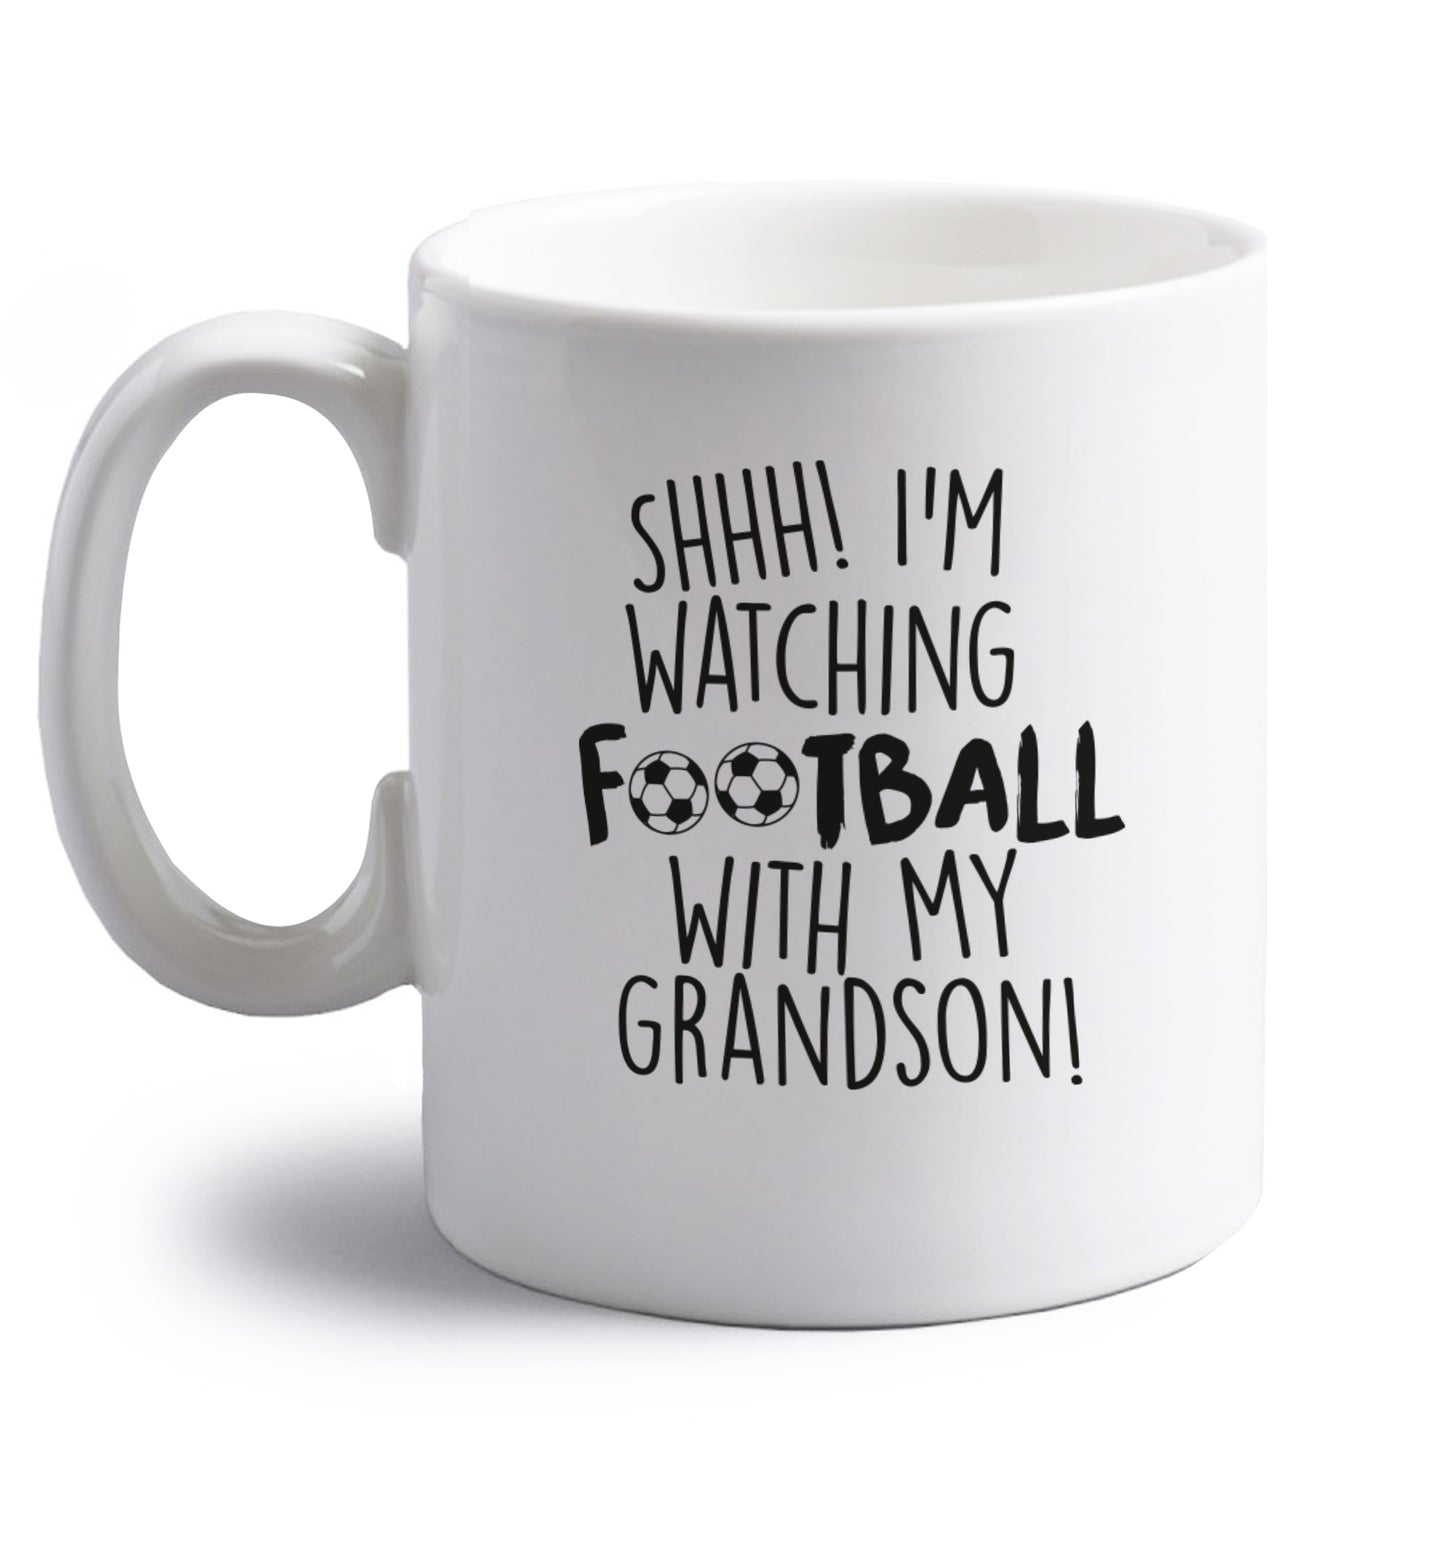 Shhh I'm watching football with my grandson right handed white ceramic mug 